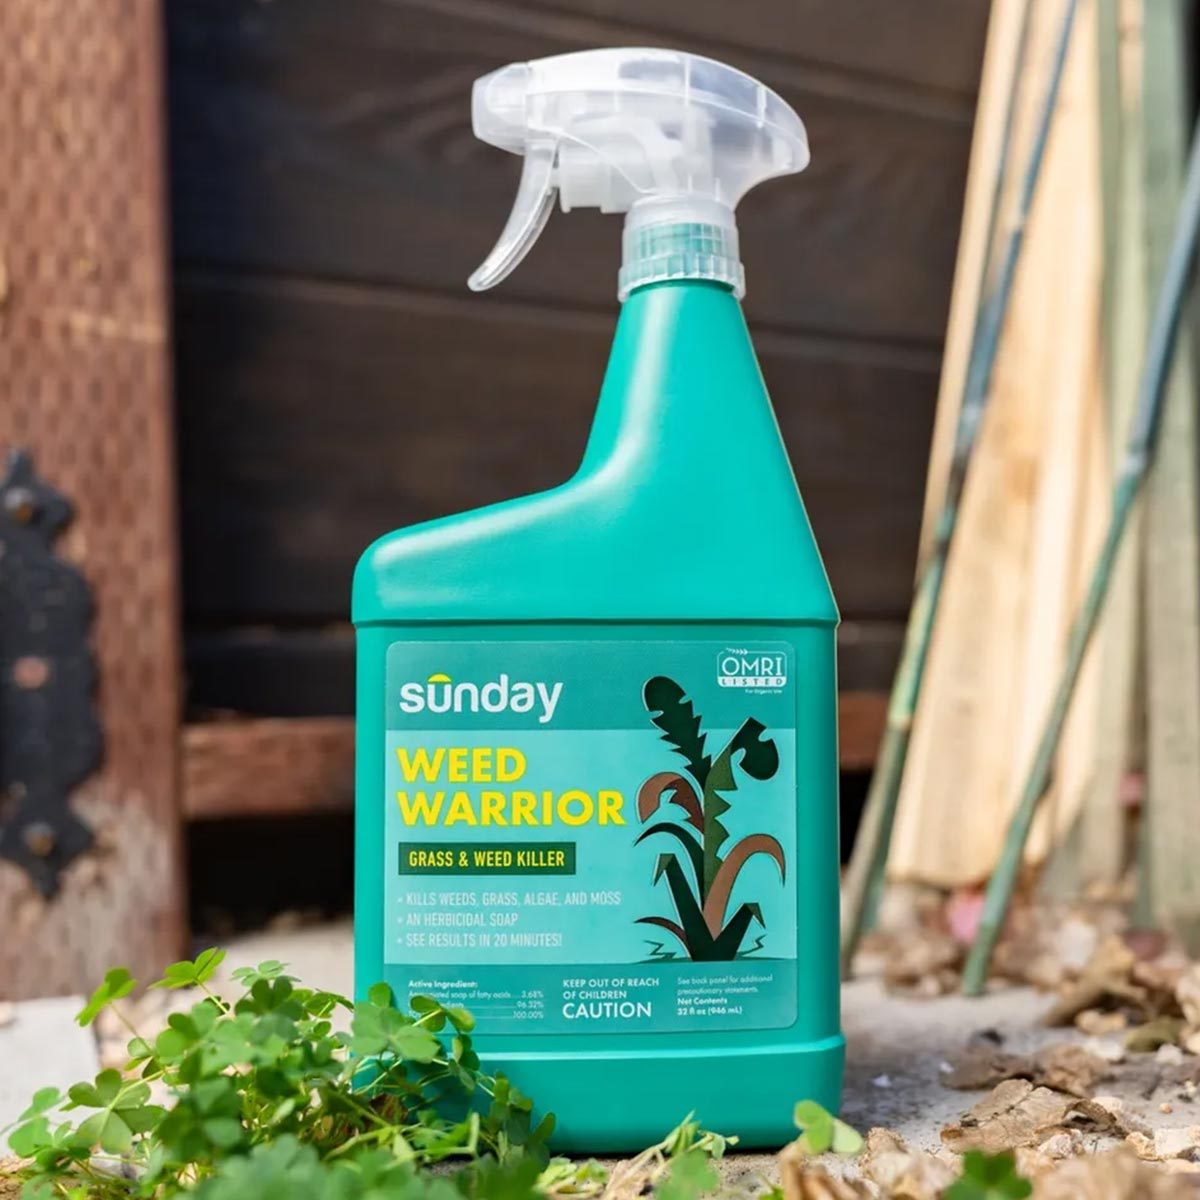 5 Best Organic Weed Killers That Are Safe for the Yard, According to an Expert